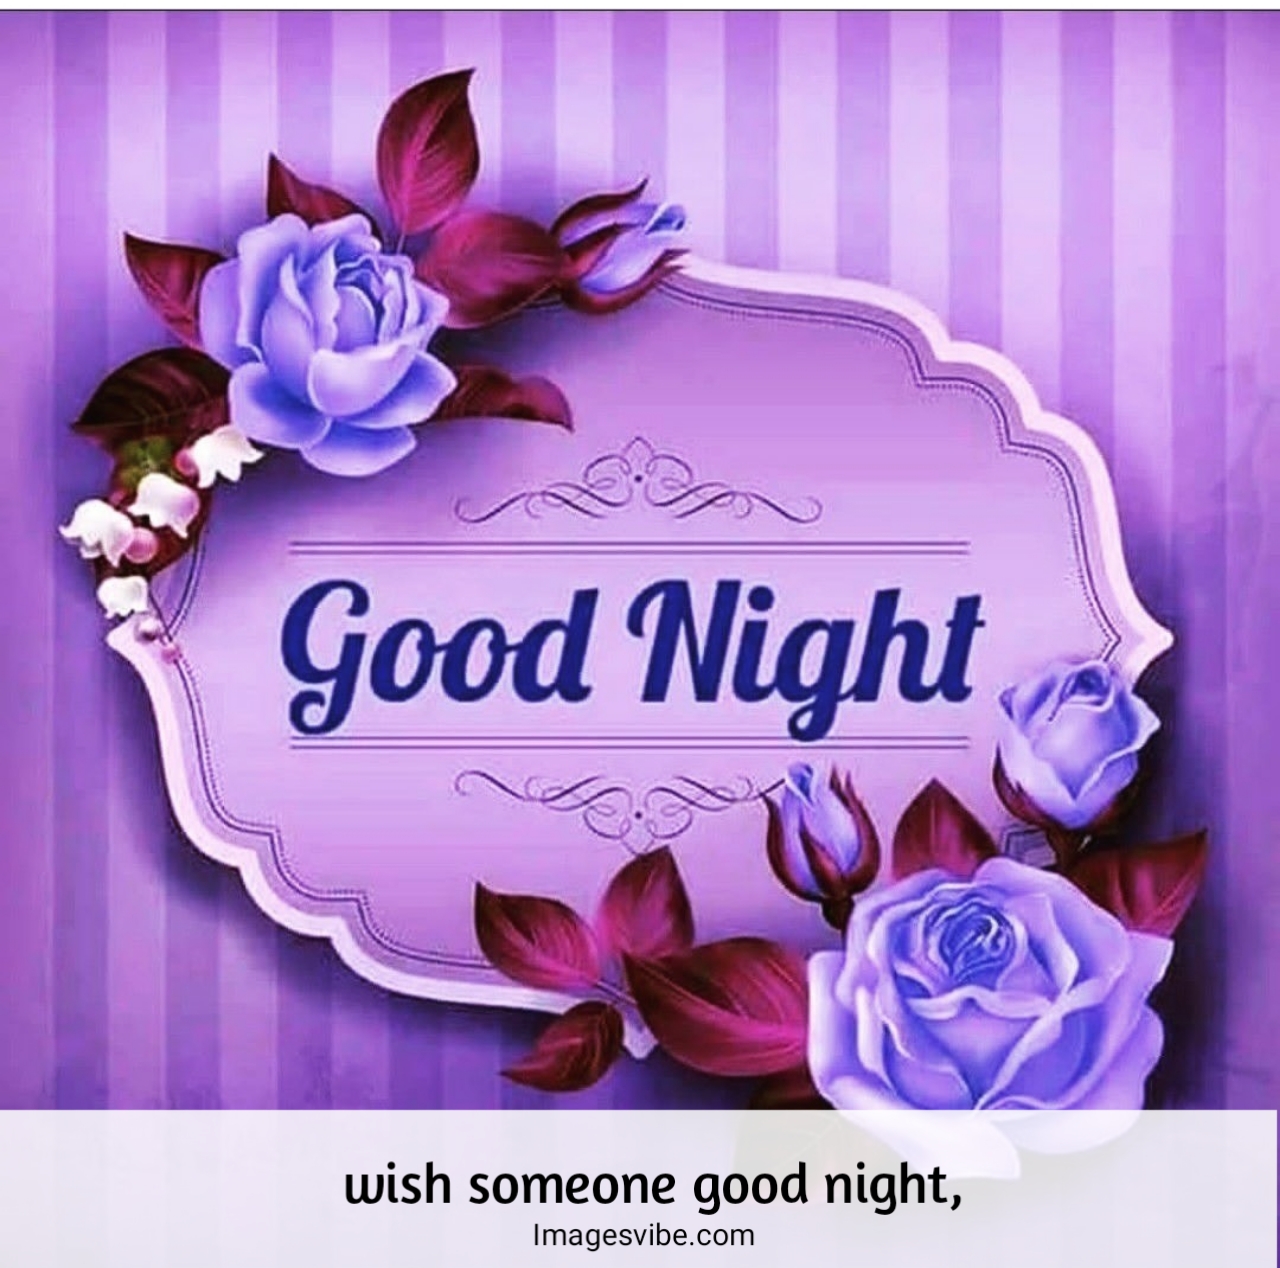 Full 4K Collection of Amazing Good Night Wishes Images – Top 999+ Images